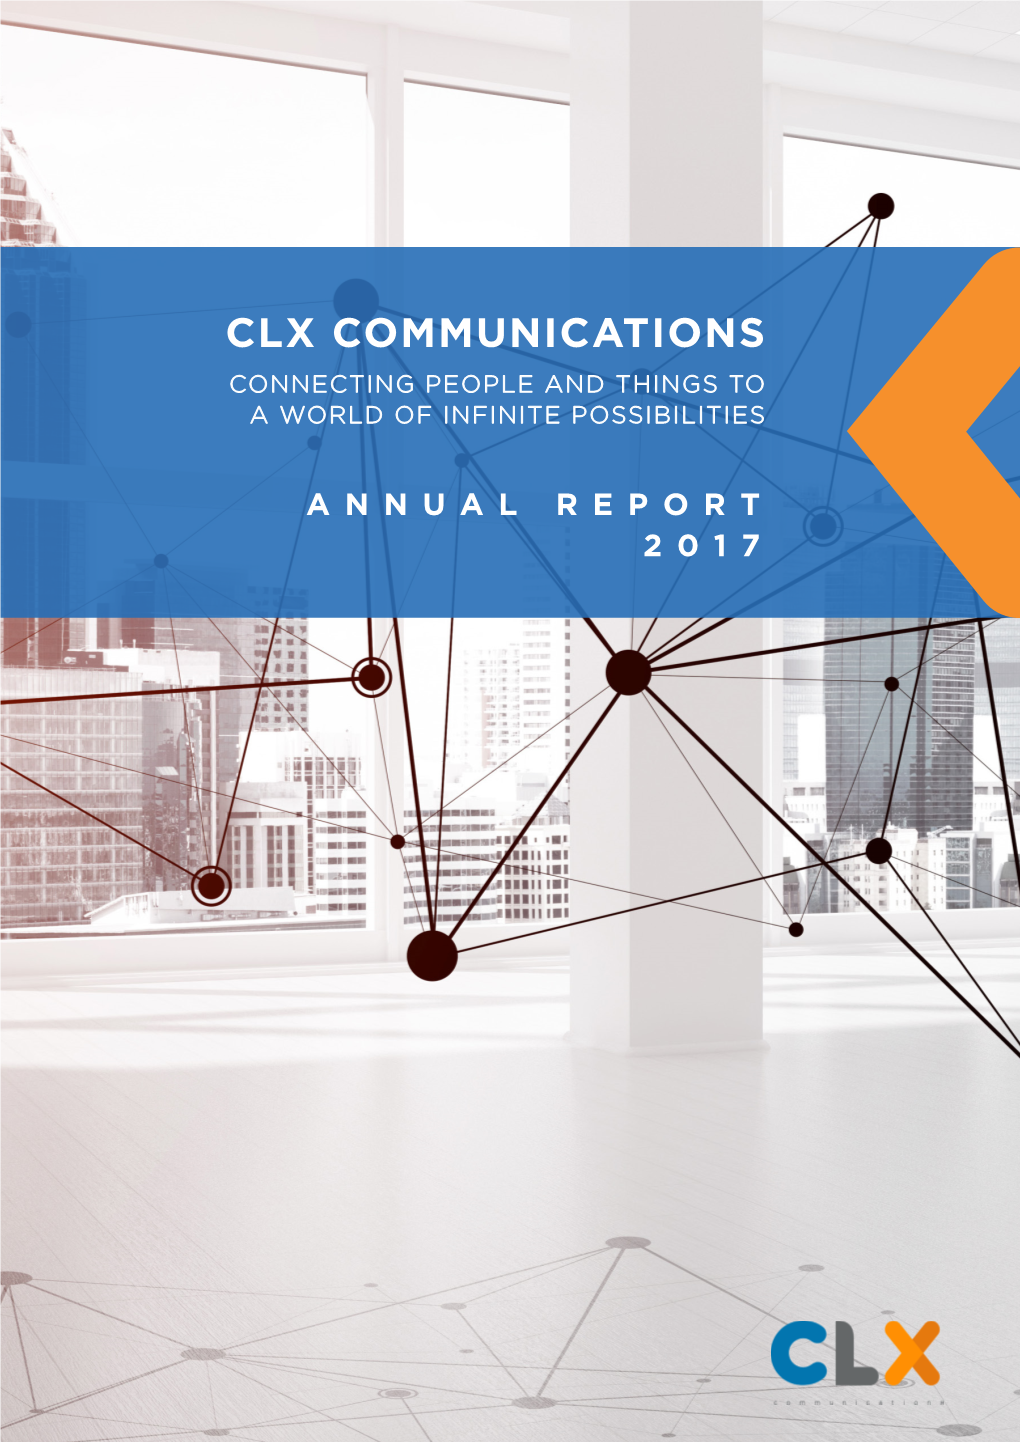 Clx Communications Connecting People and Things to a World of Infinite Possibilities